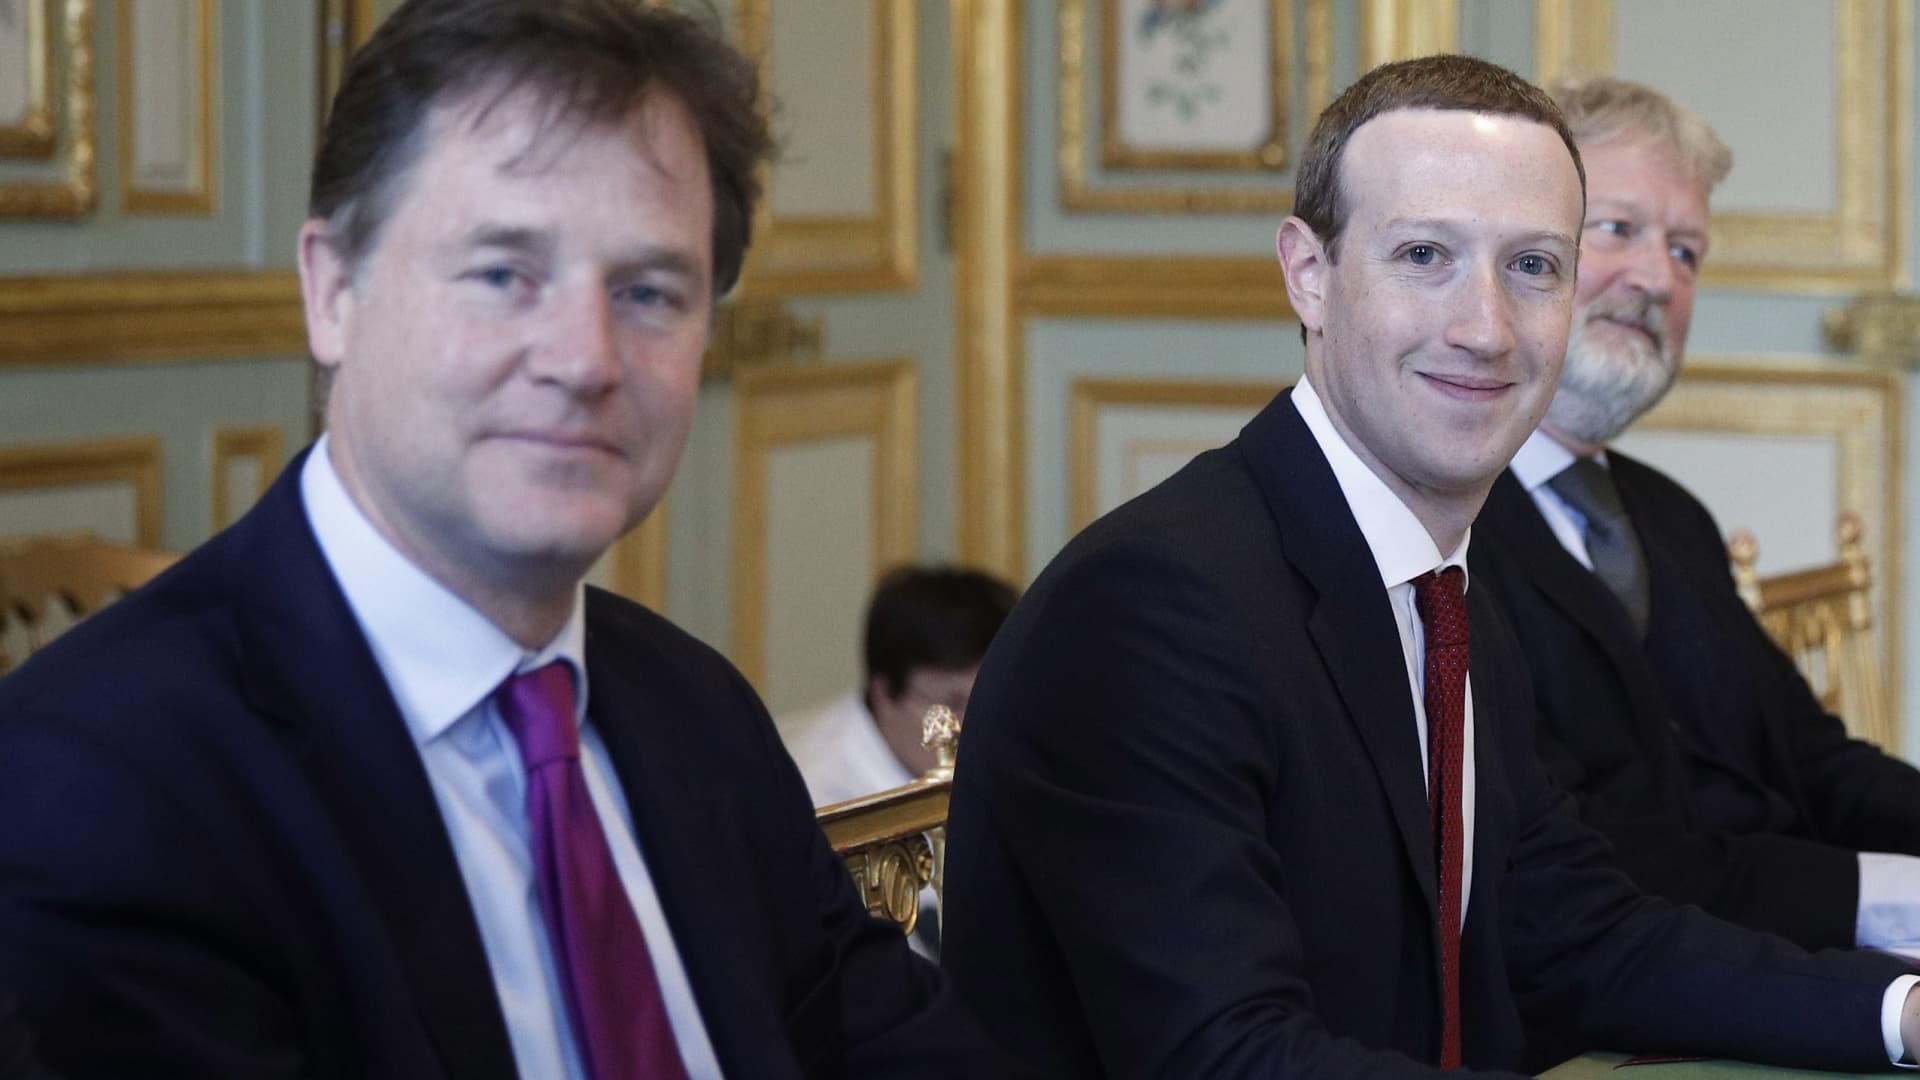 CEO and co-founder of Facebook Mark Zuckerberg poses next to Facebook head of global policy communications and former UK deputy prime minister Nick Clegg (L) prior to a meeting with French President at the Elysee Palace in Paris, on May 10, 2019.